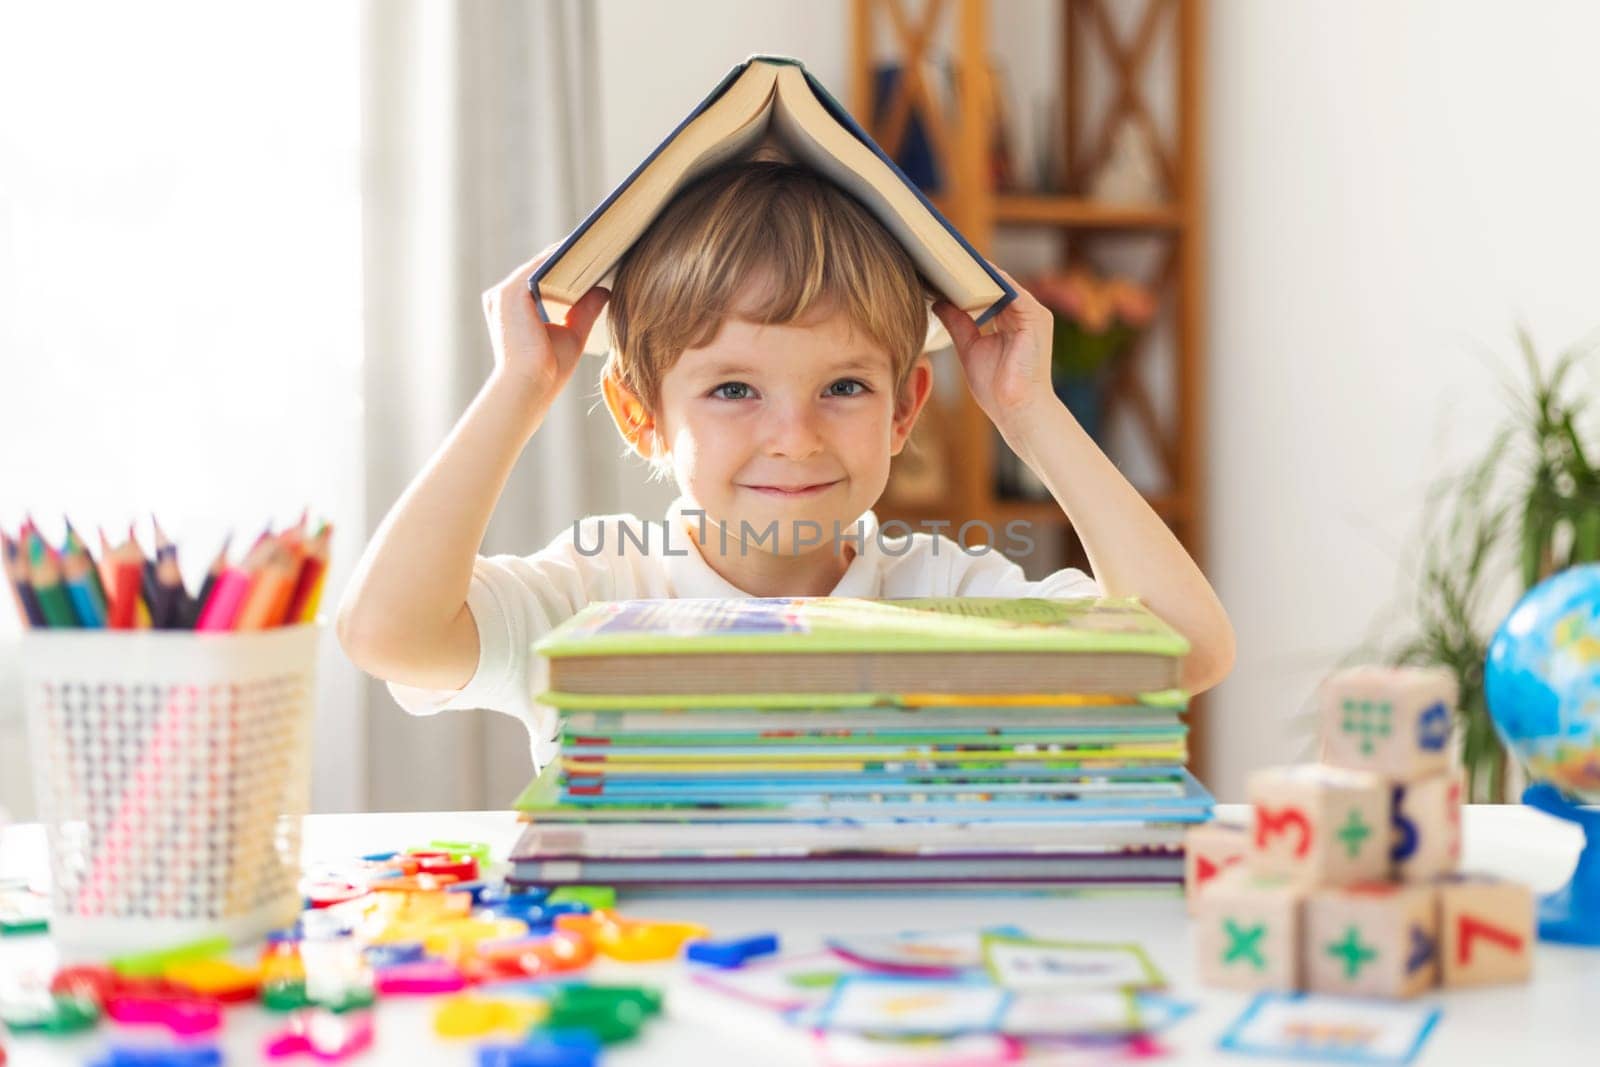 Boy with Books in a Home Learning Setting by andreyz